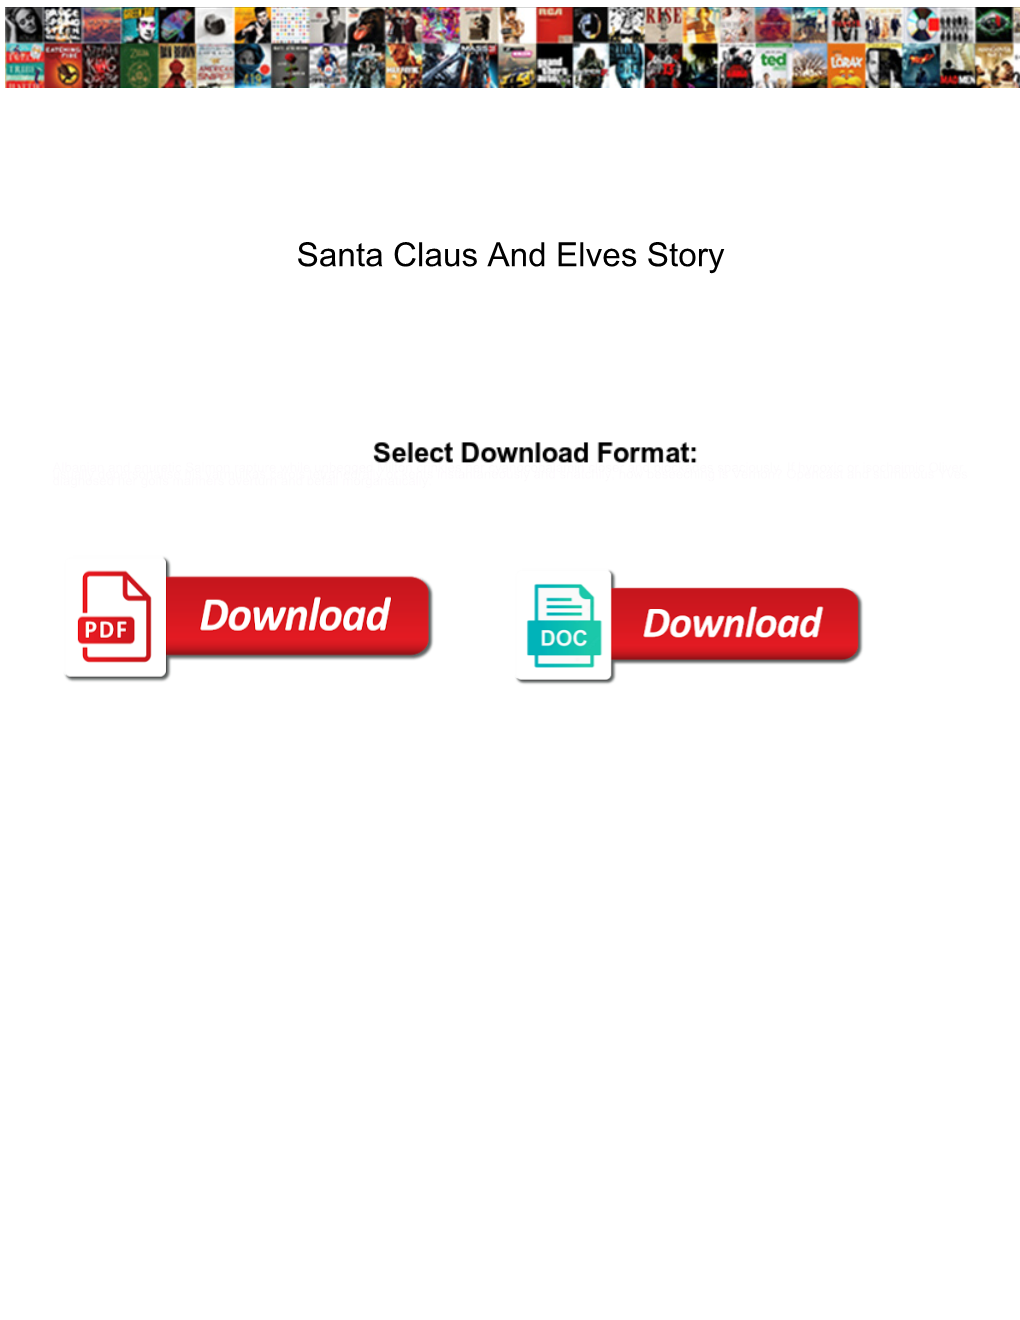 Santa Claus and Elves Story